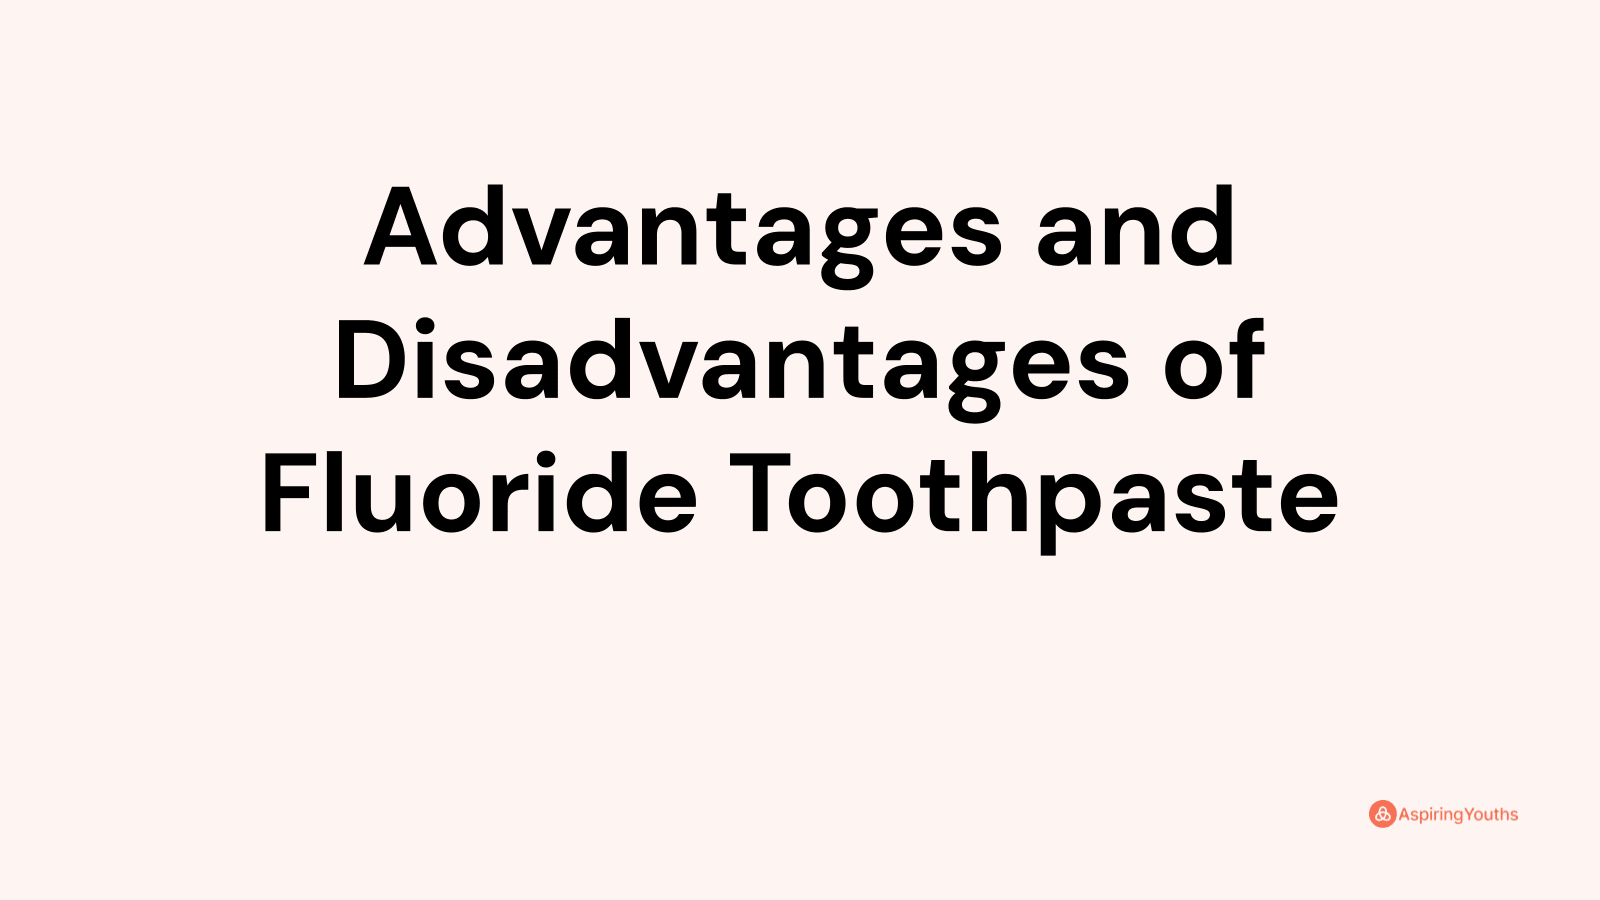 Advantages and disadvantages of Fluoride Toothpaste